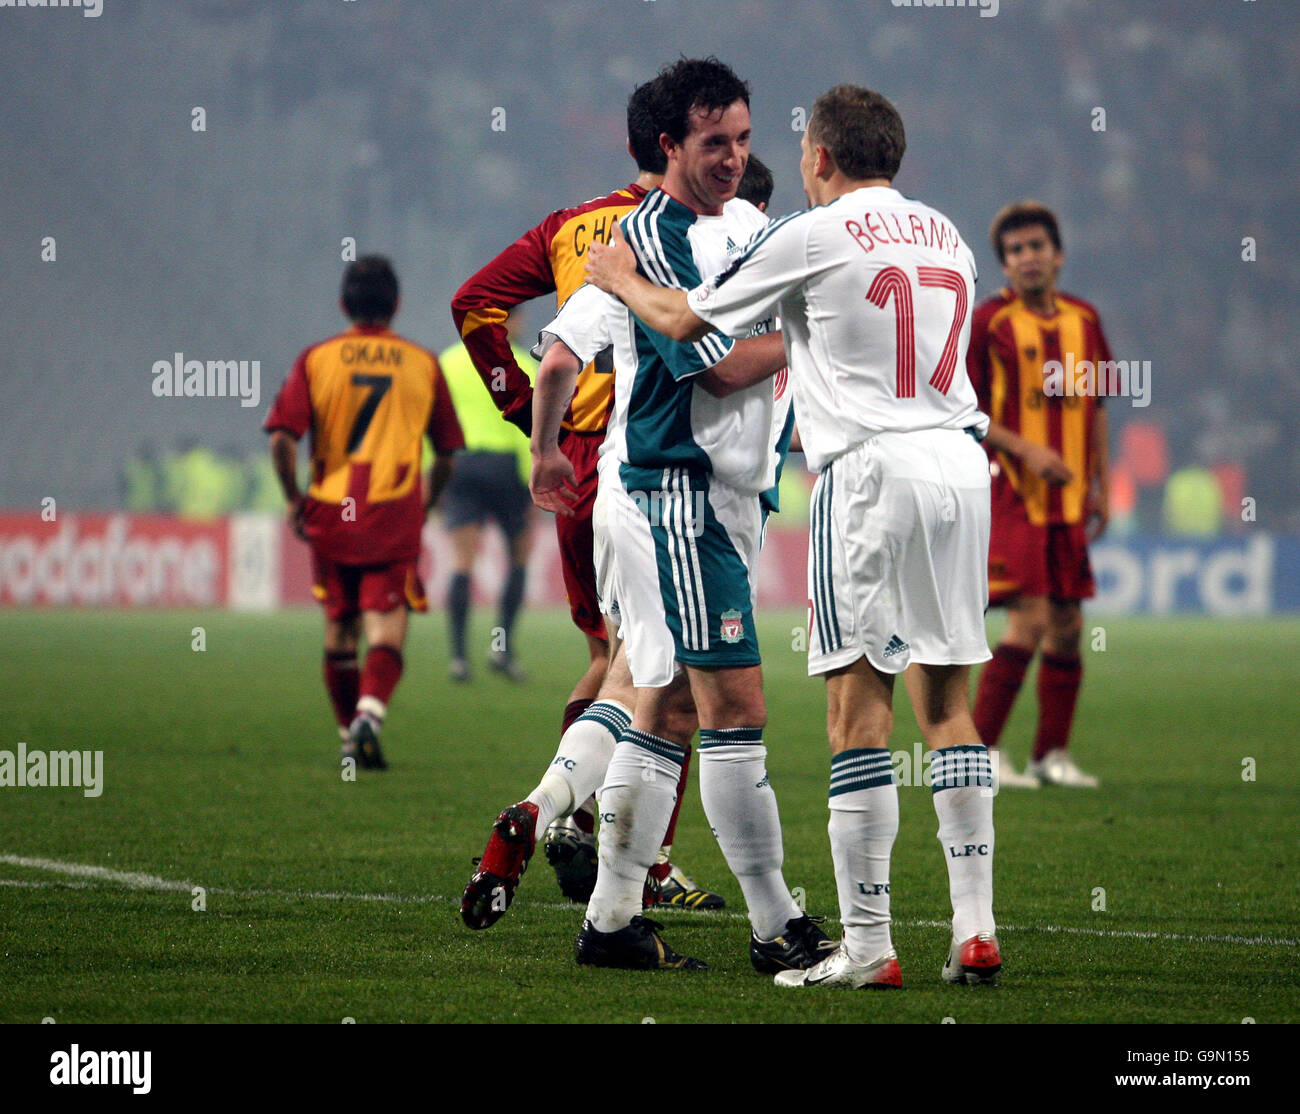 Soccer - UEFA Champions League - Group C - Galatasaray v Liverpool - Ataturk Olympic Stadium. Liverpool's Robbie Fowler celebrates scoring the opening goal against Galatasaray with Craig Bellamy Stock Photo